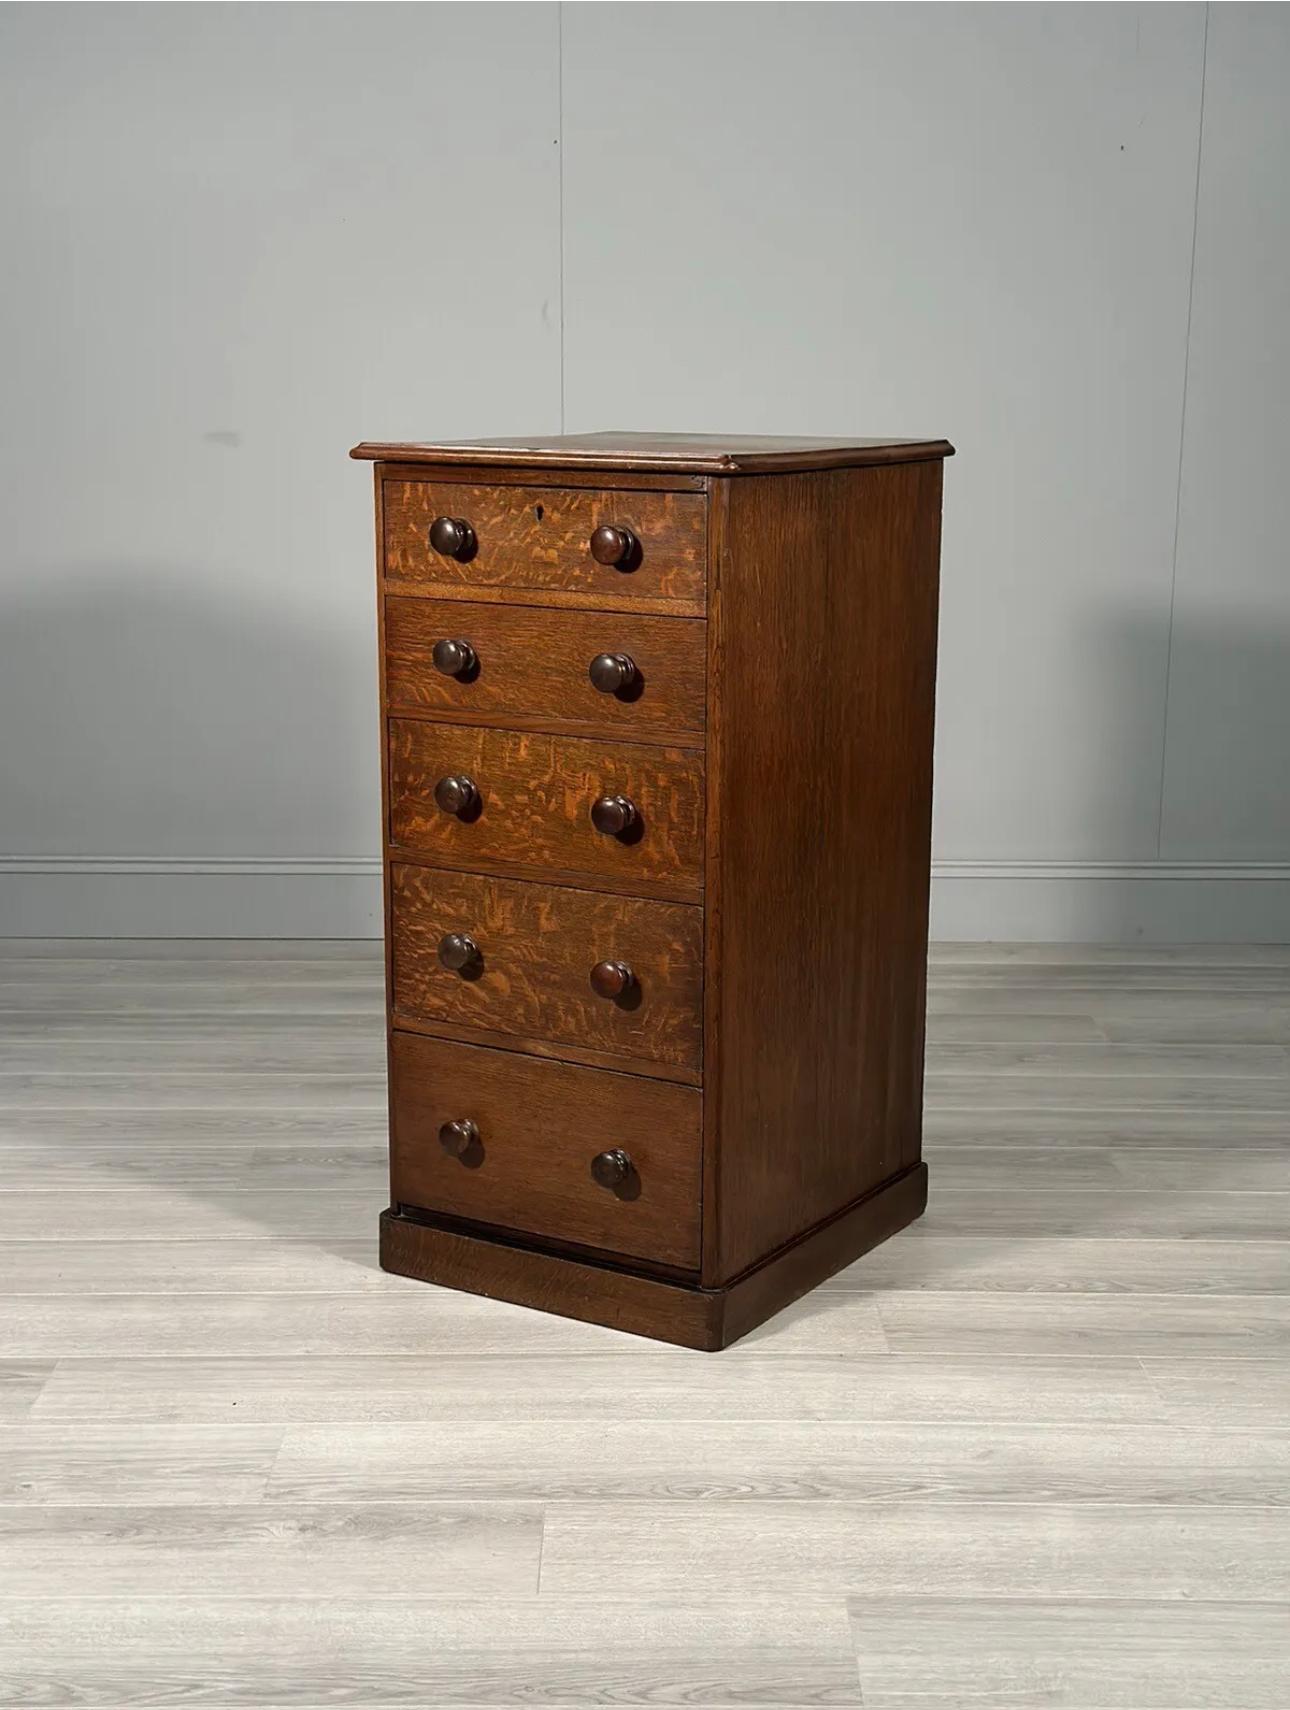 A tallboy chest of drawers dating to the late 19th century, English made with superb quarter sawn oak the chest has 5 staggered in size drawers with original turned oak knobs and is in very good original condition with label to the back showing